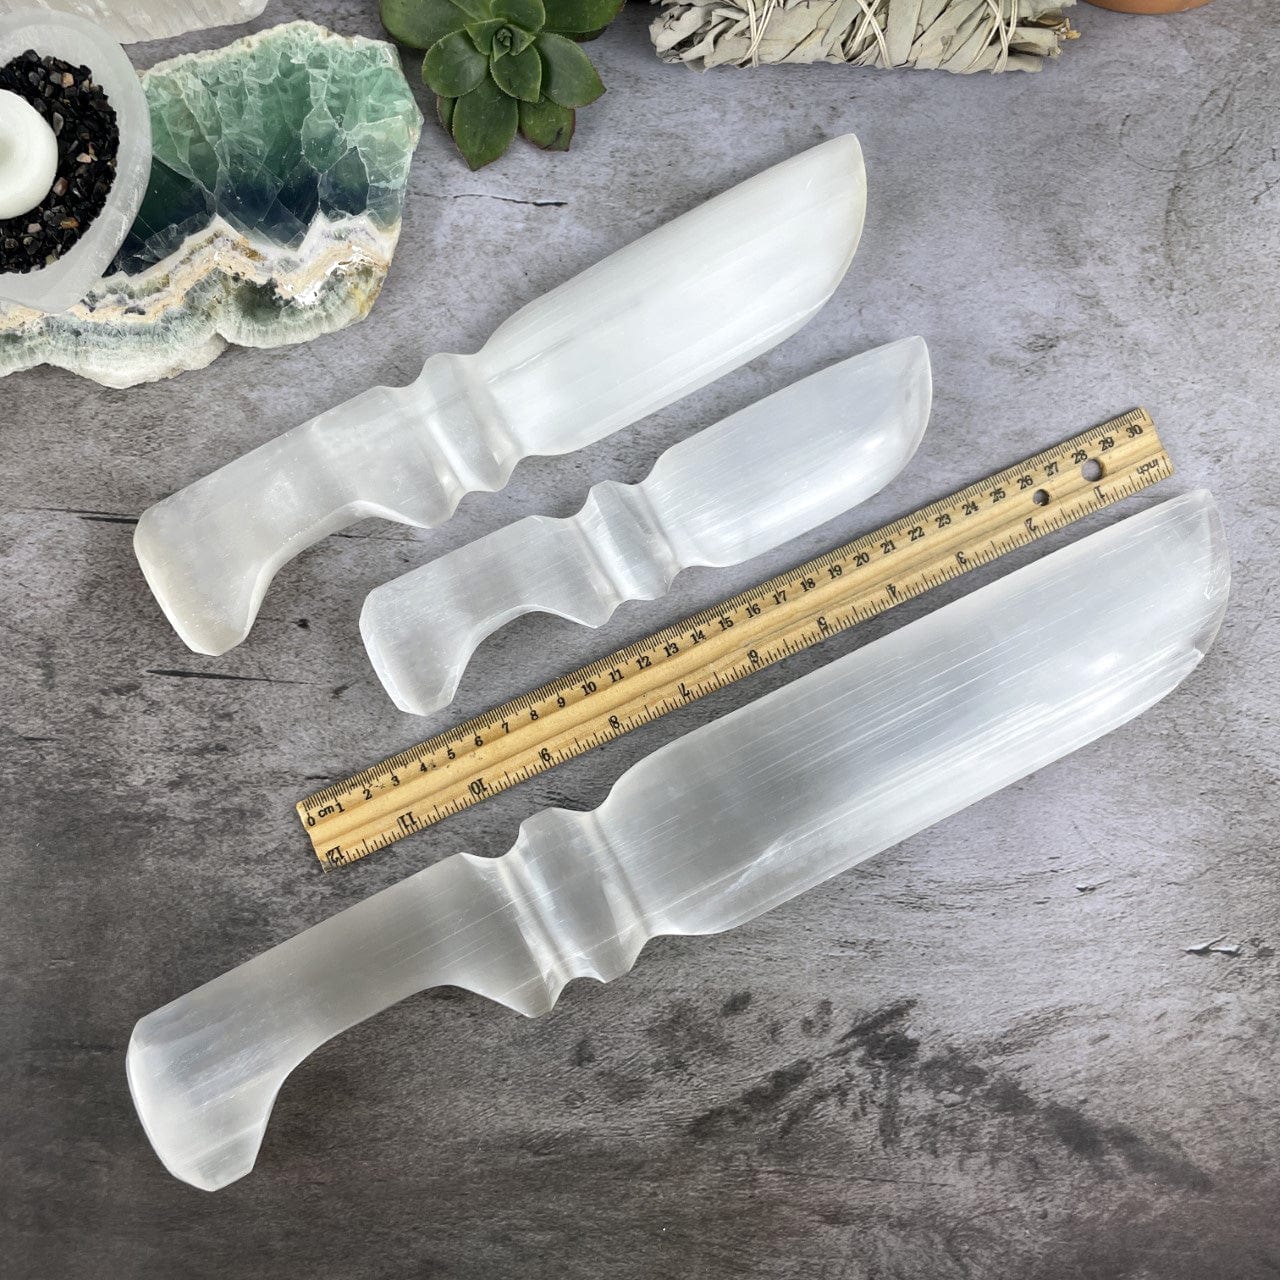 3 sizes of Selenite Knives with Hand Cut and Polished Handles next to a ruler for sizing